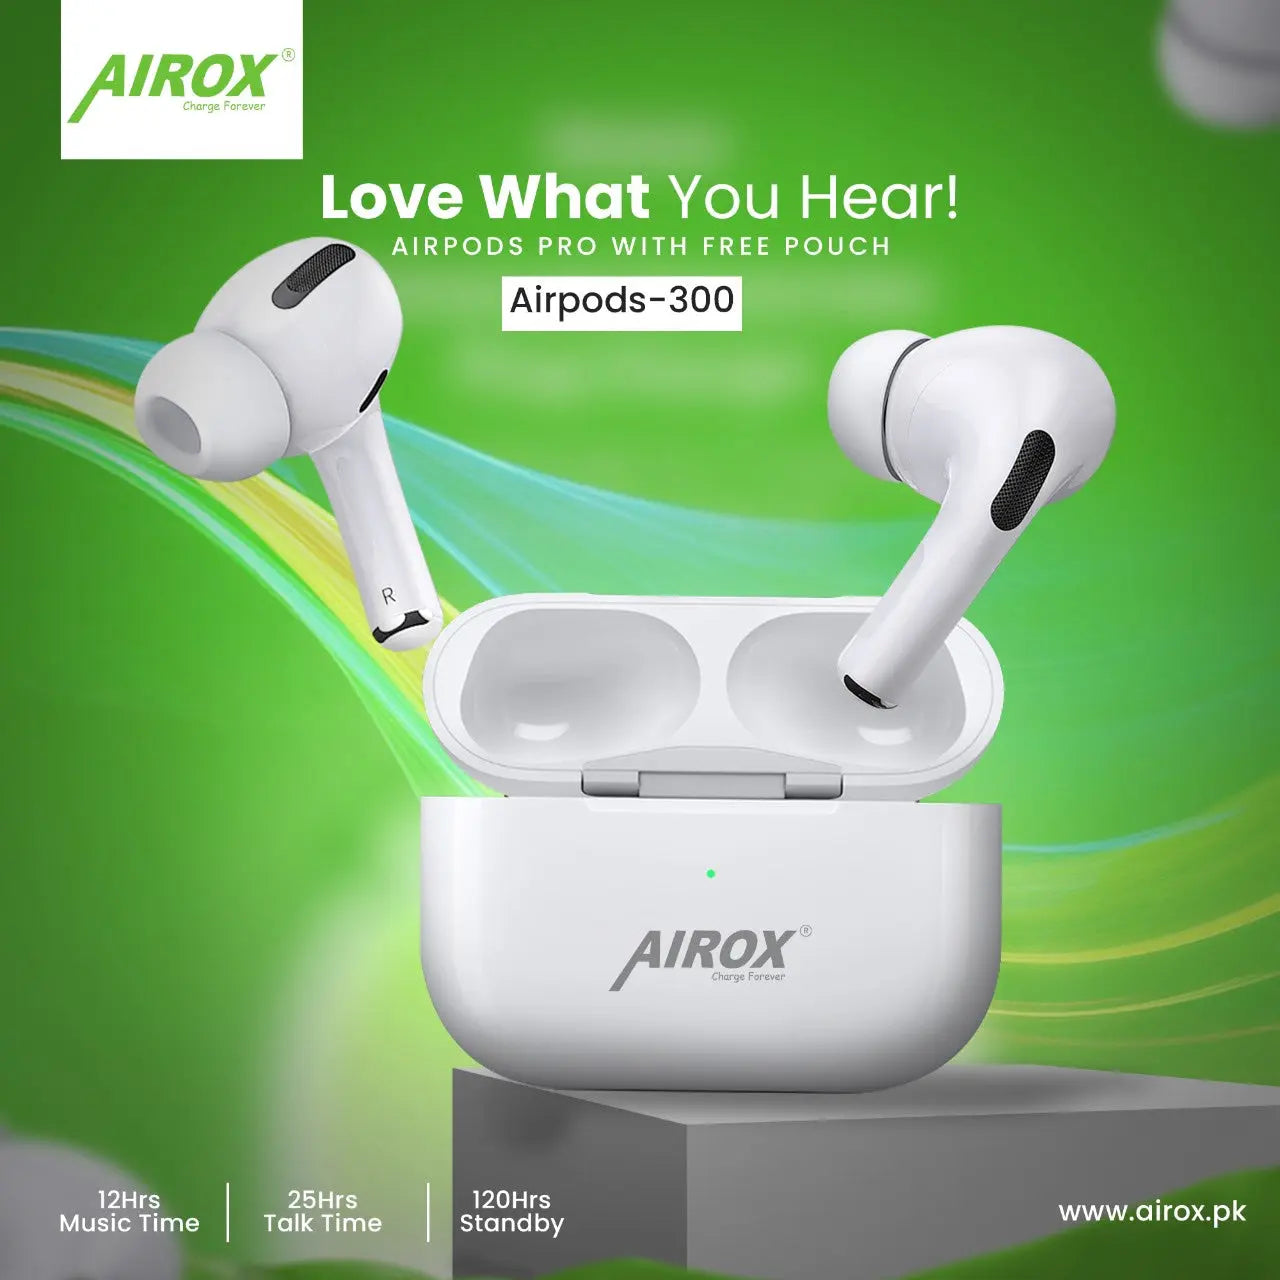 Airox 300 AirPods Pro Price in Pakistan - Unbeatable Value – Airox.pk